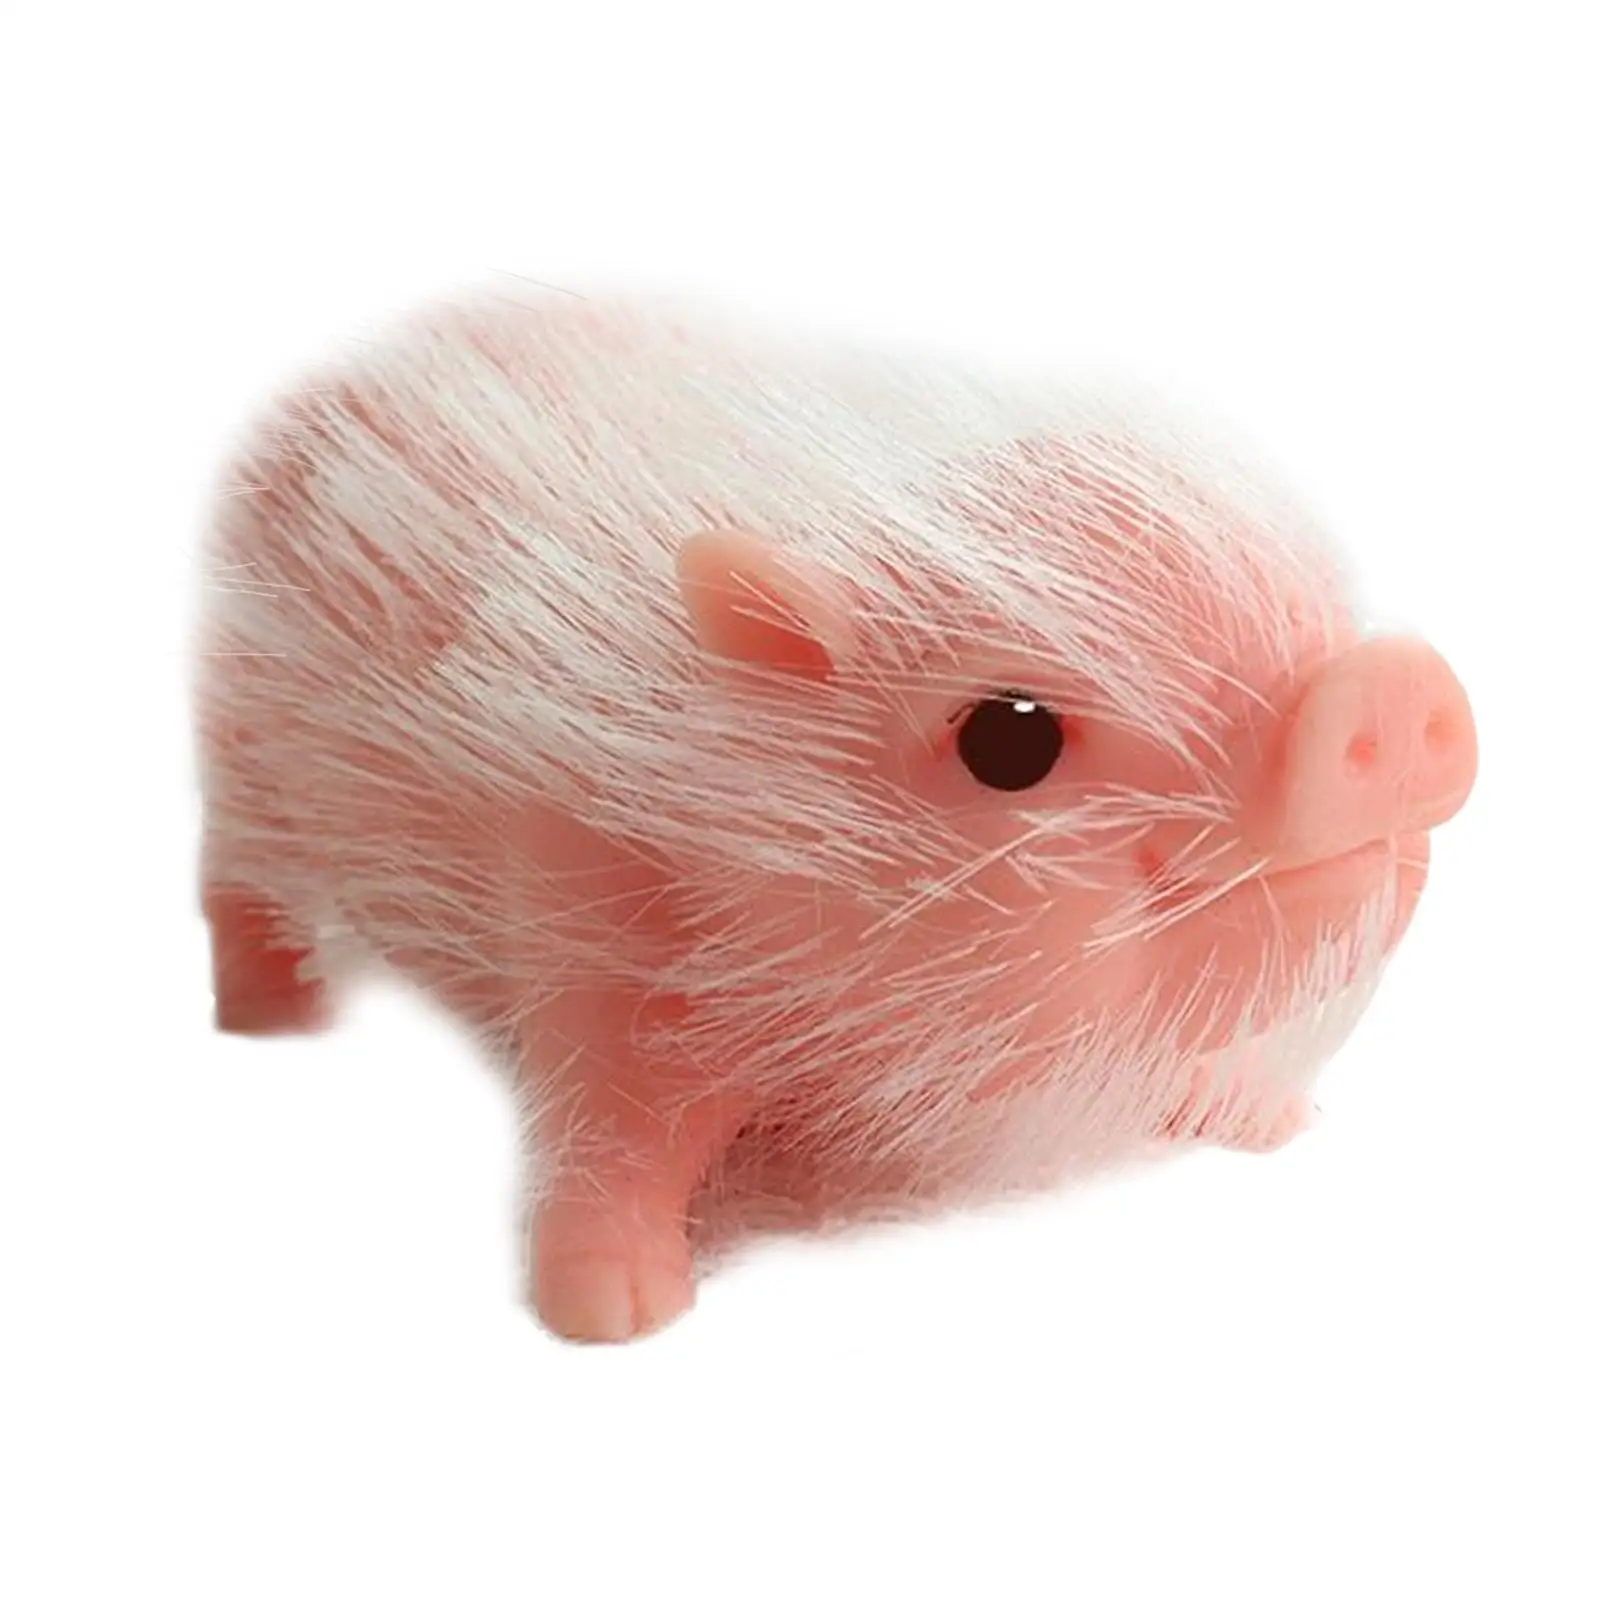 Cute Silicone Piglet Sensort Toy Body Silicon Fake Animals Fake Pets for Home Display Garden Decoration Cosplay Halloween